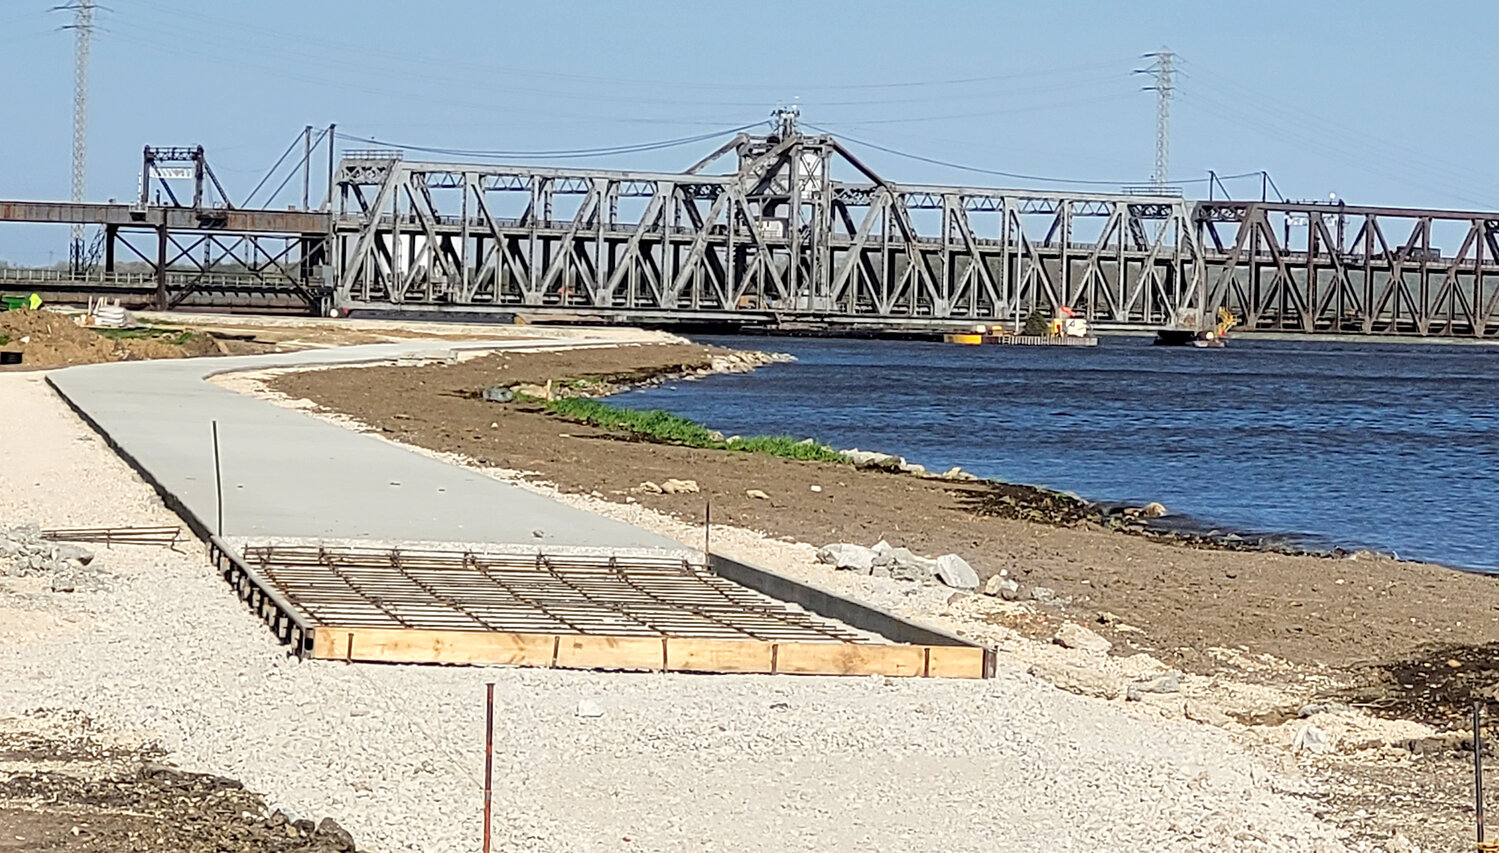 A new 10-foot wellness path has replaced the road next to the river on the east part of Riverview Park. The path will hook up with another path that runs along the marina and out to turnaround on the jetty wall.